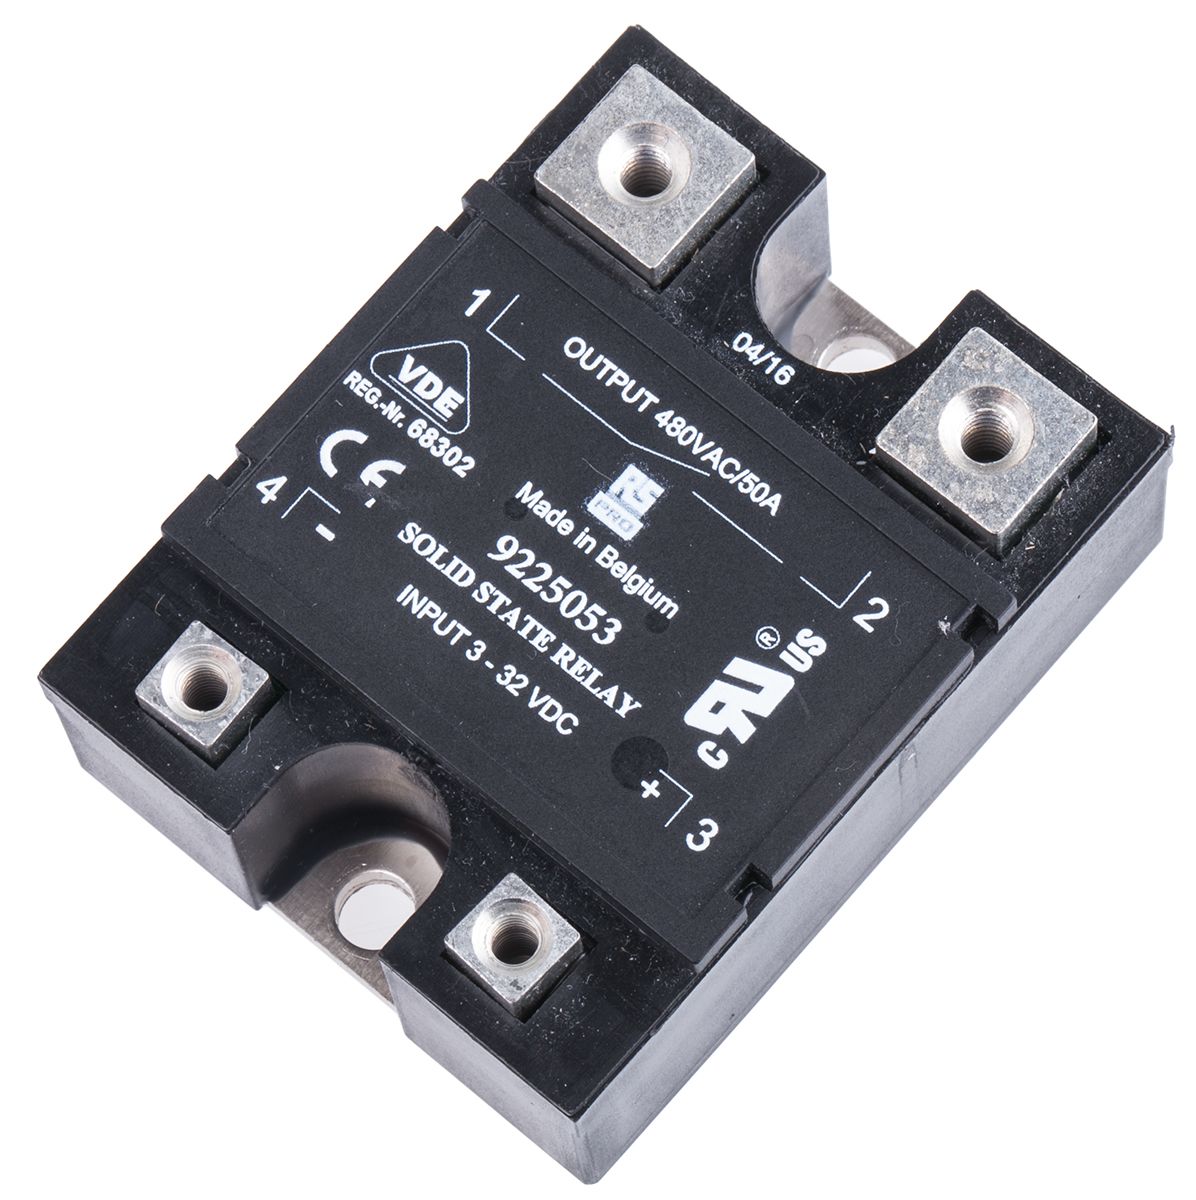 RS PRO Panel Mount Solid State Relay, 50 A rms Max. Load, 480 V ac Max. Load, 32 V dc Max. Control